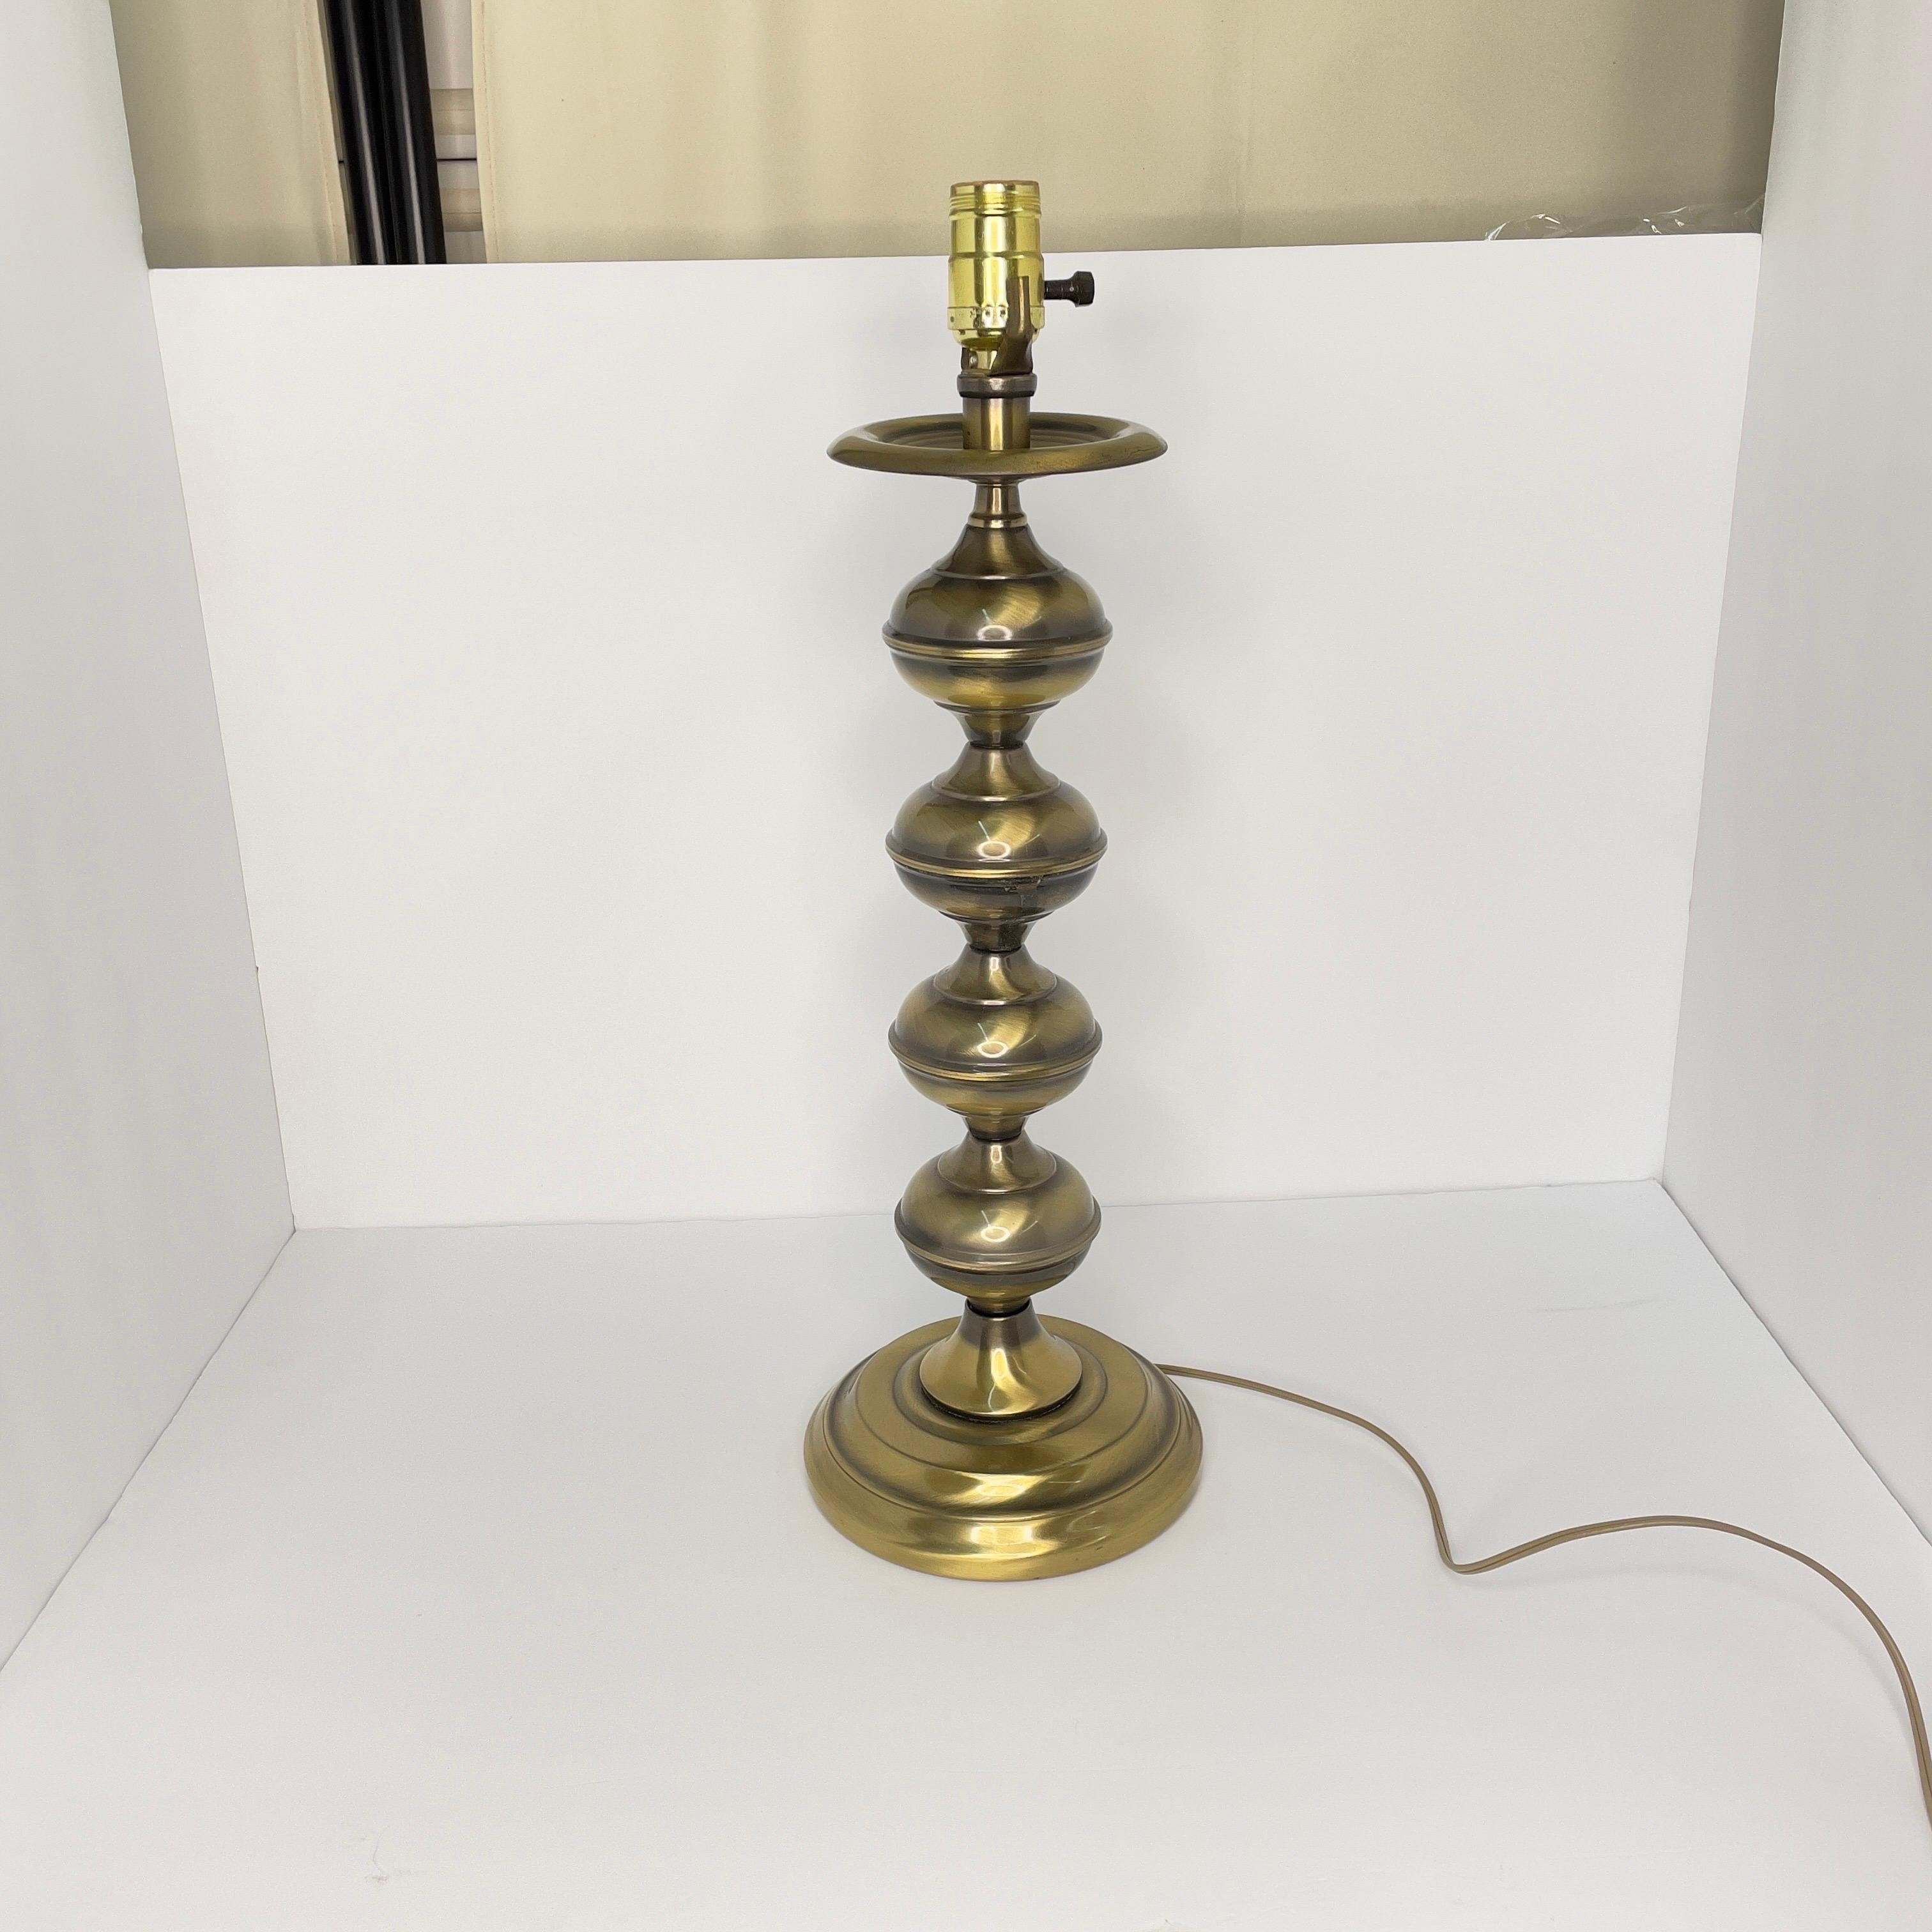 Hollywood Regency Mid Century Modern Brass Turned Table Lamp With Shade- 2 Pieces For Sale